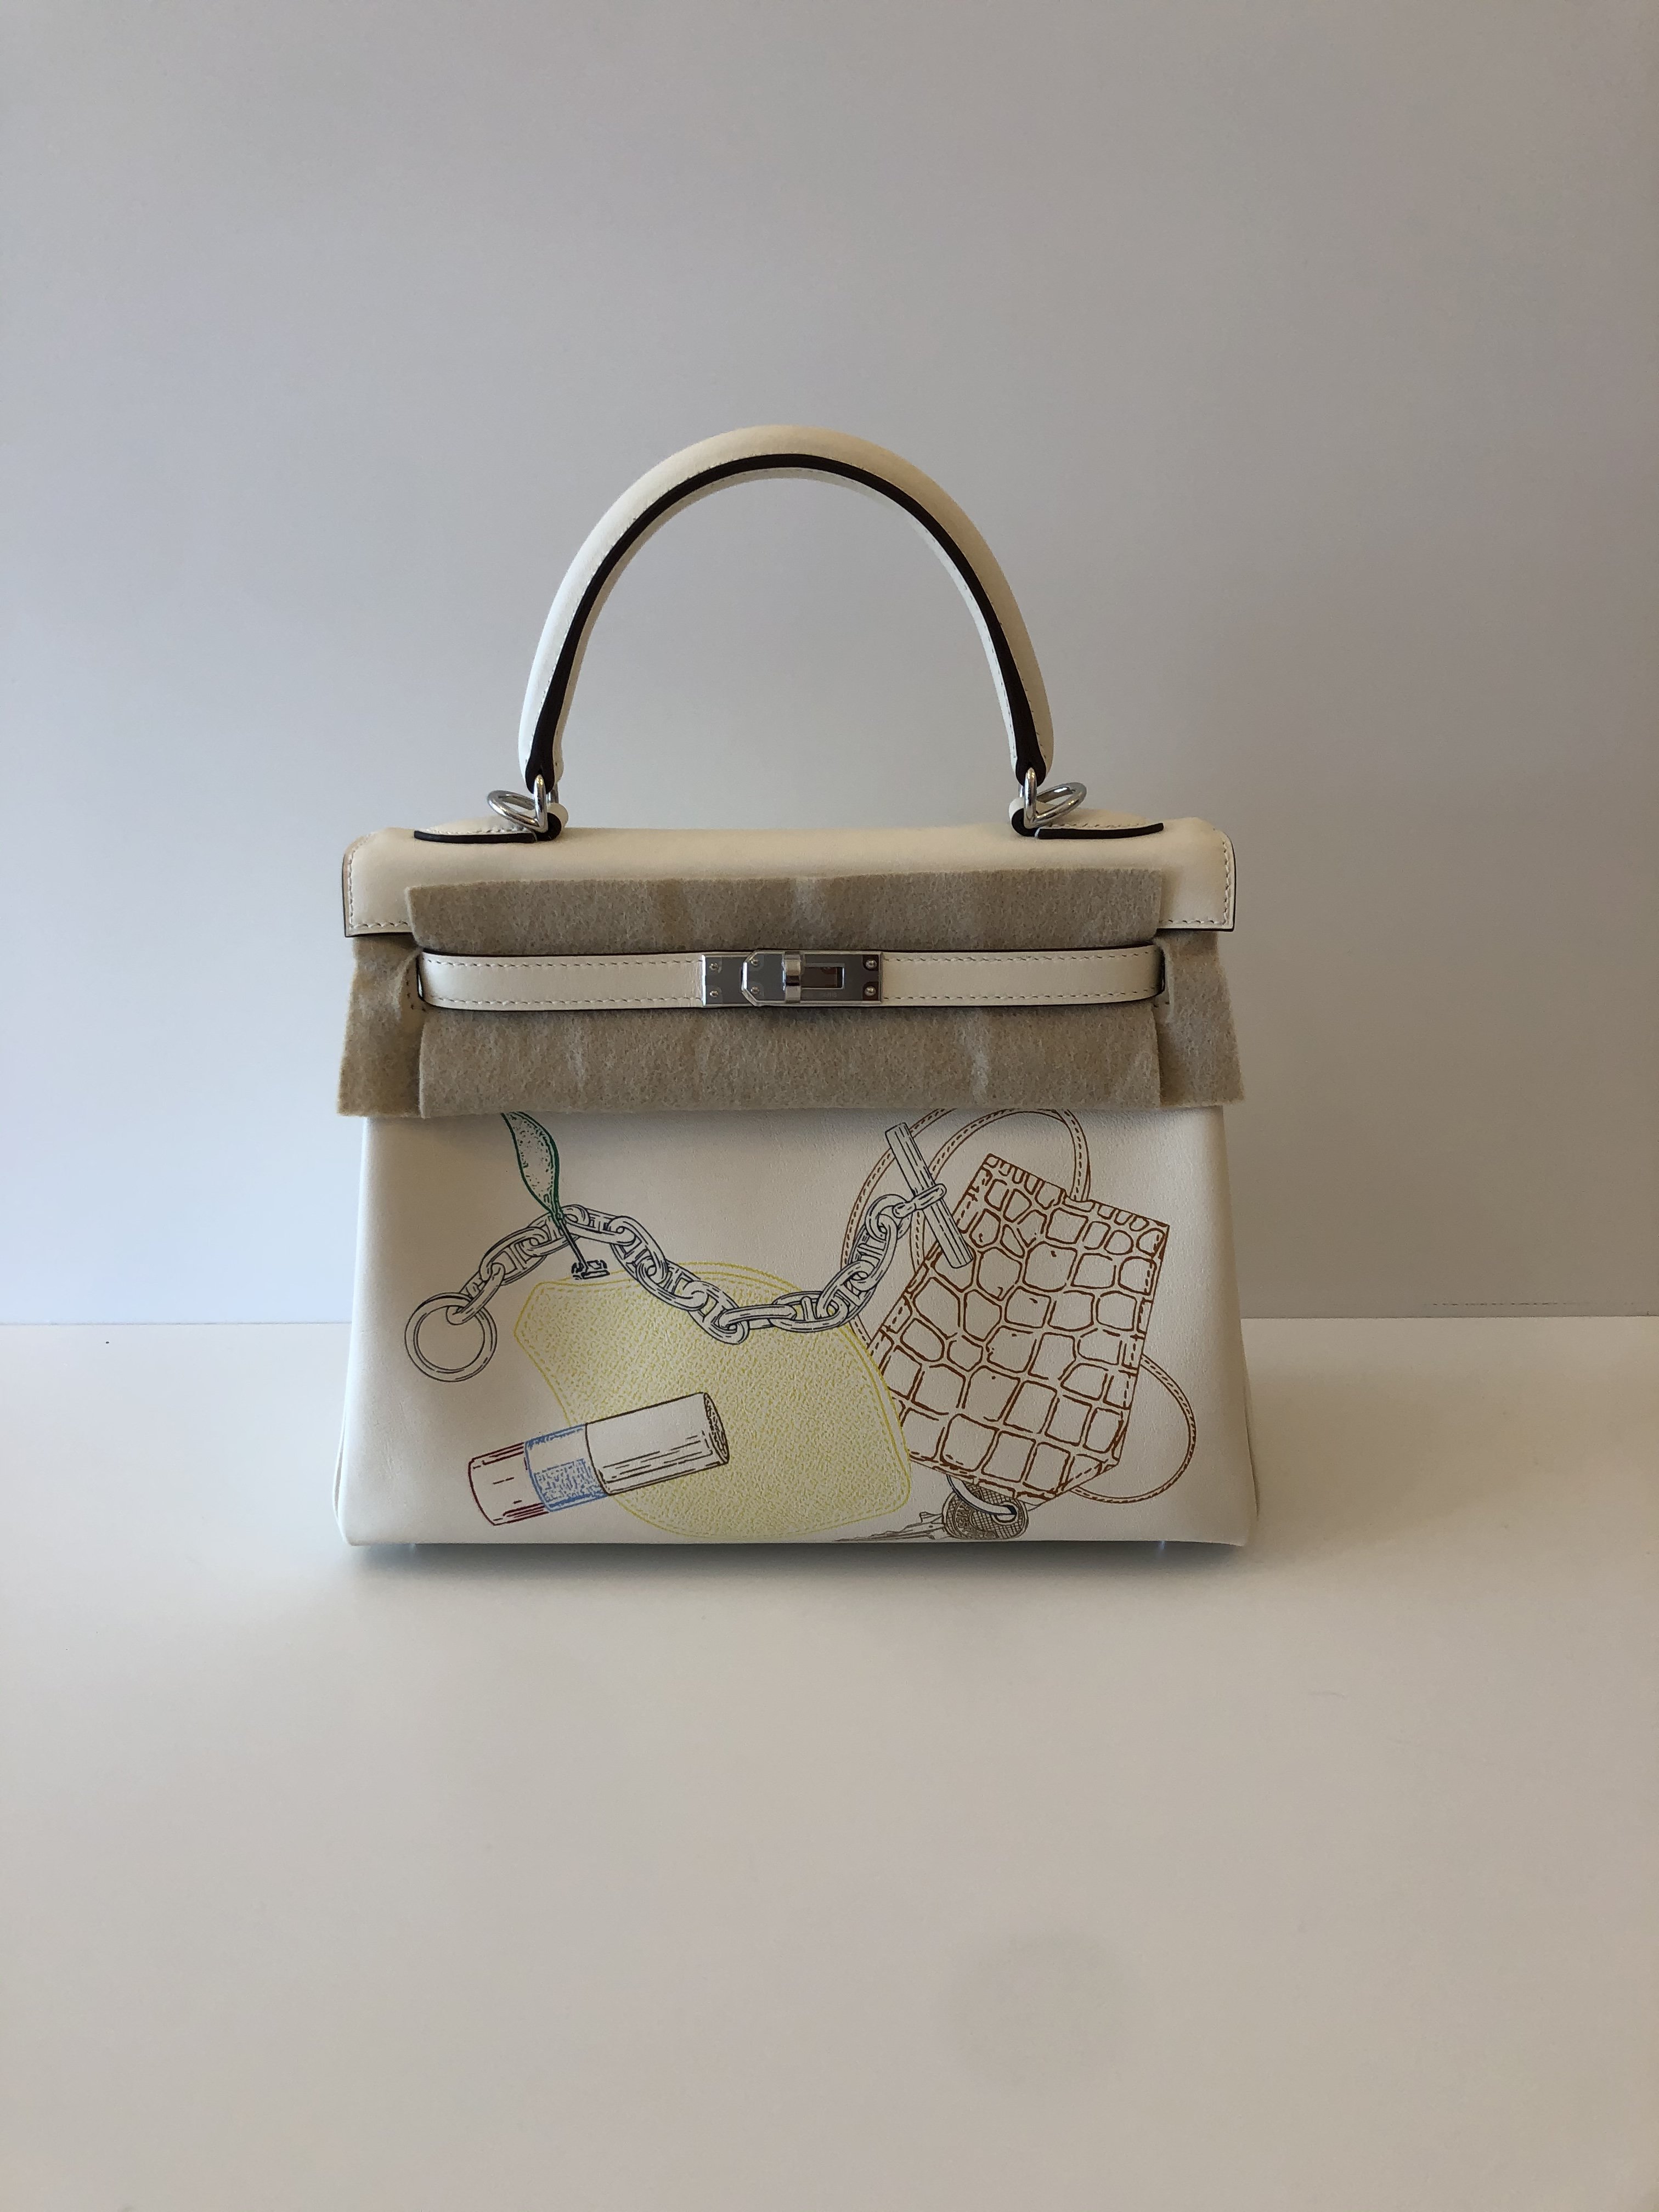 Original Hermes Kelly 25 in and out -neu- Limited Edition